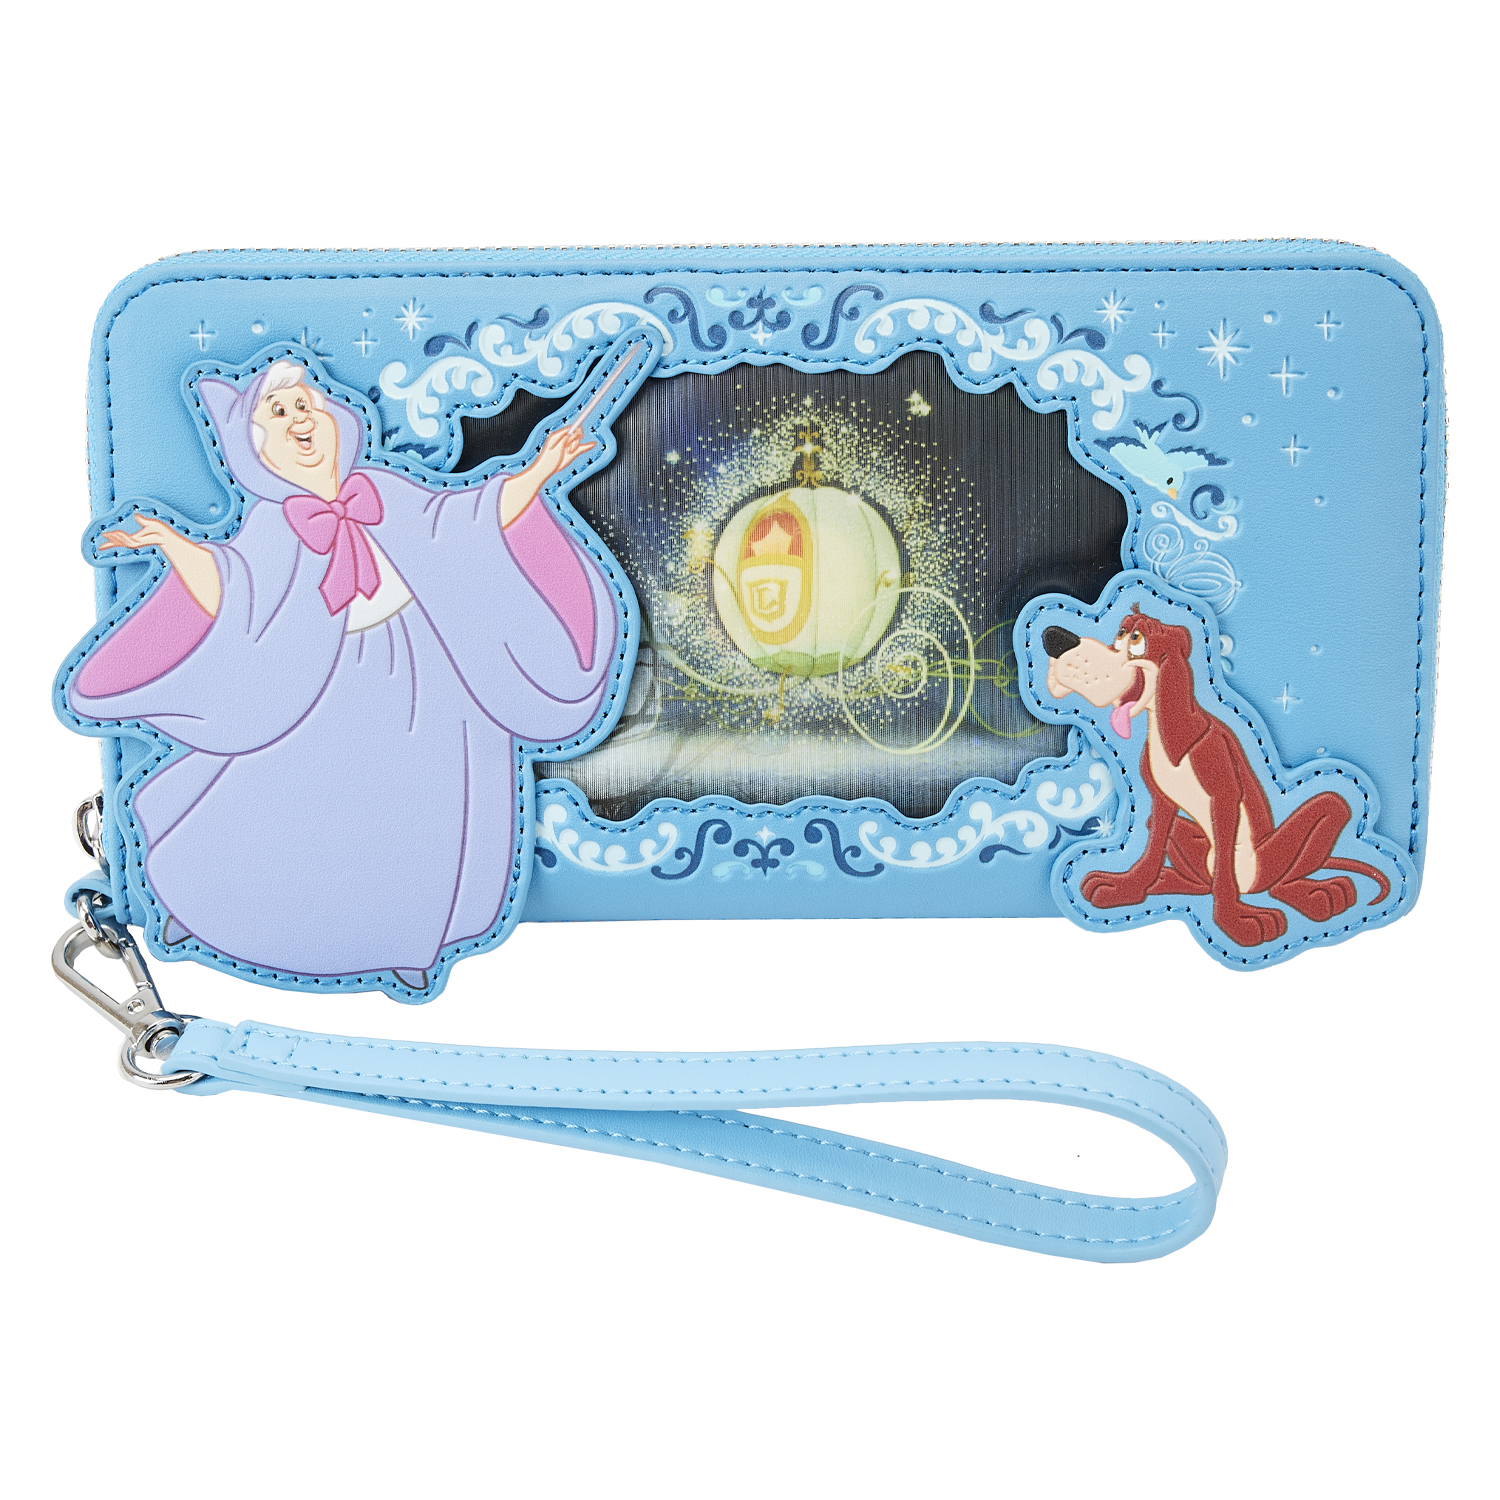 Loungefly portefeuille cendrillon